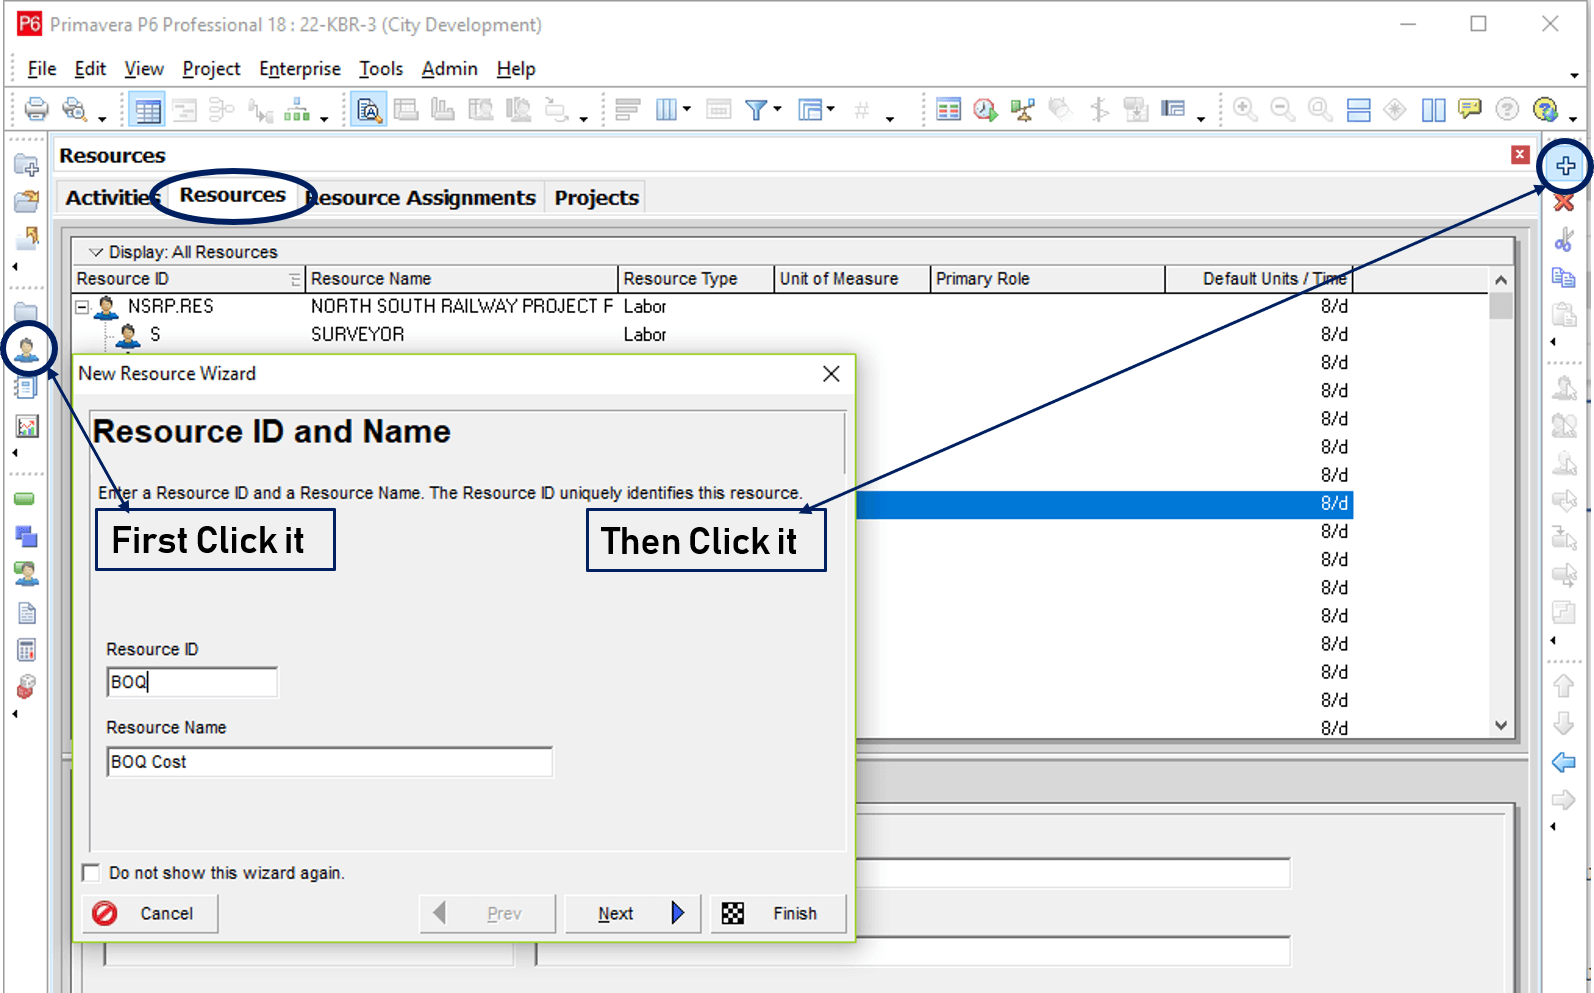 How to add resources in Primavera P6